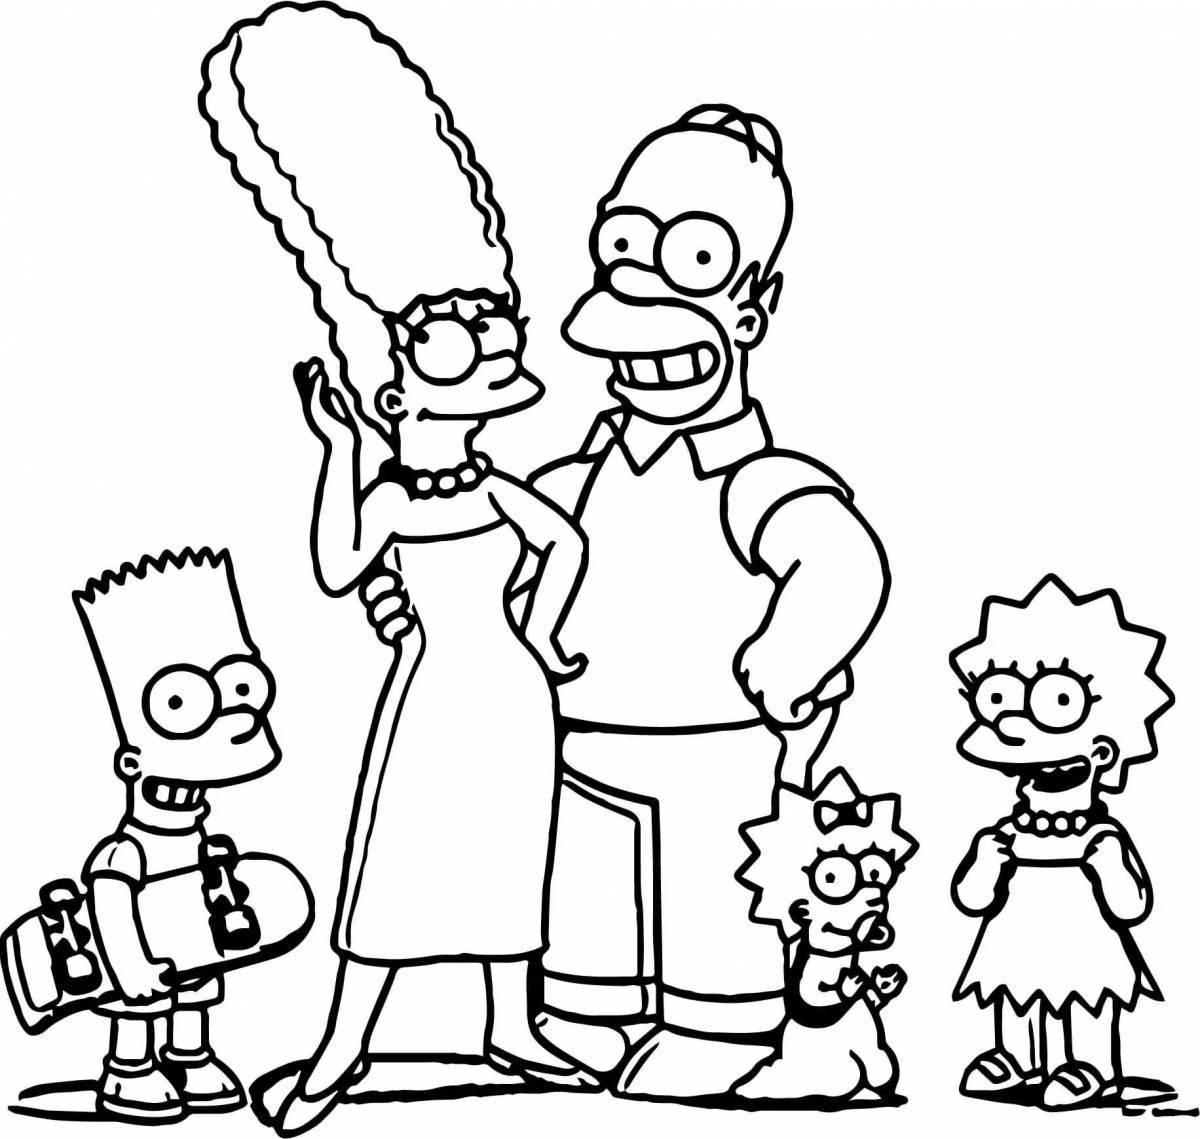 Colouring beautiful marge simpson